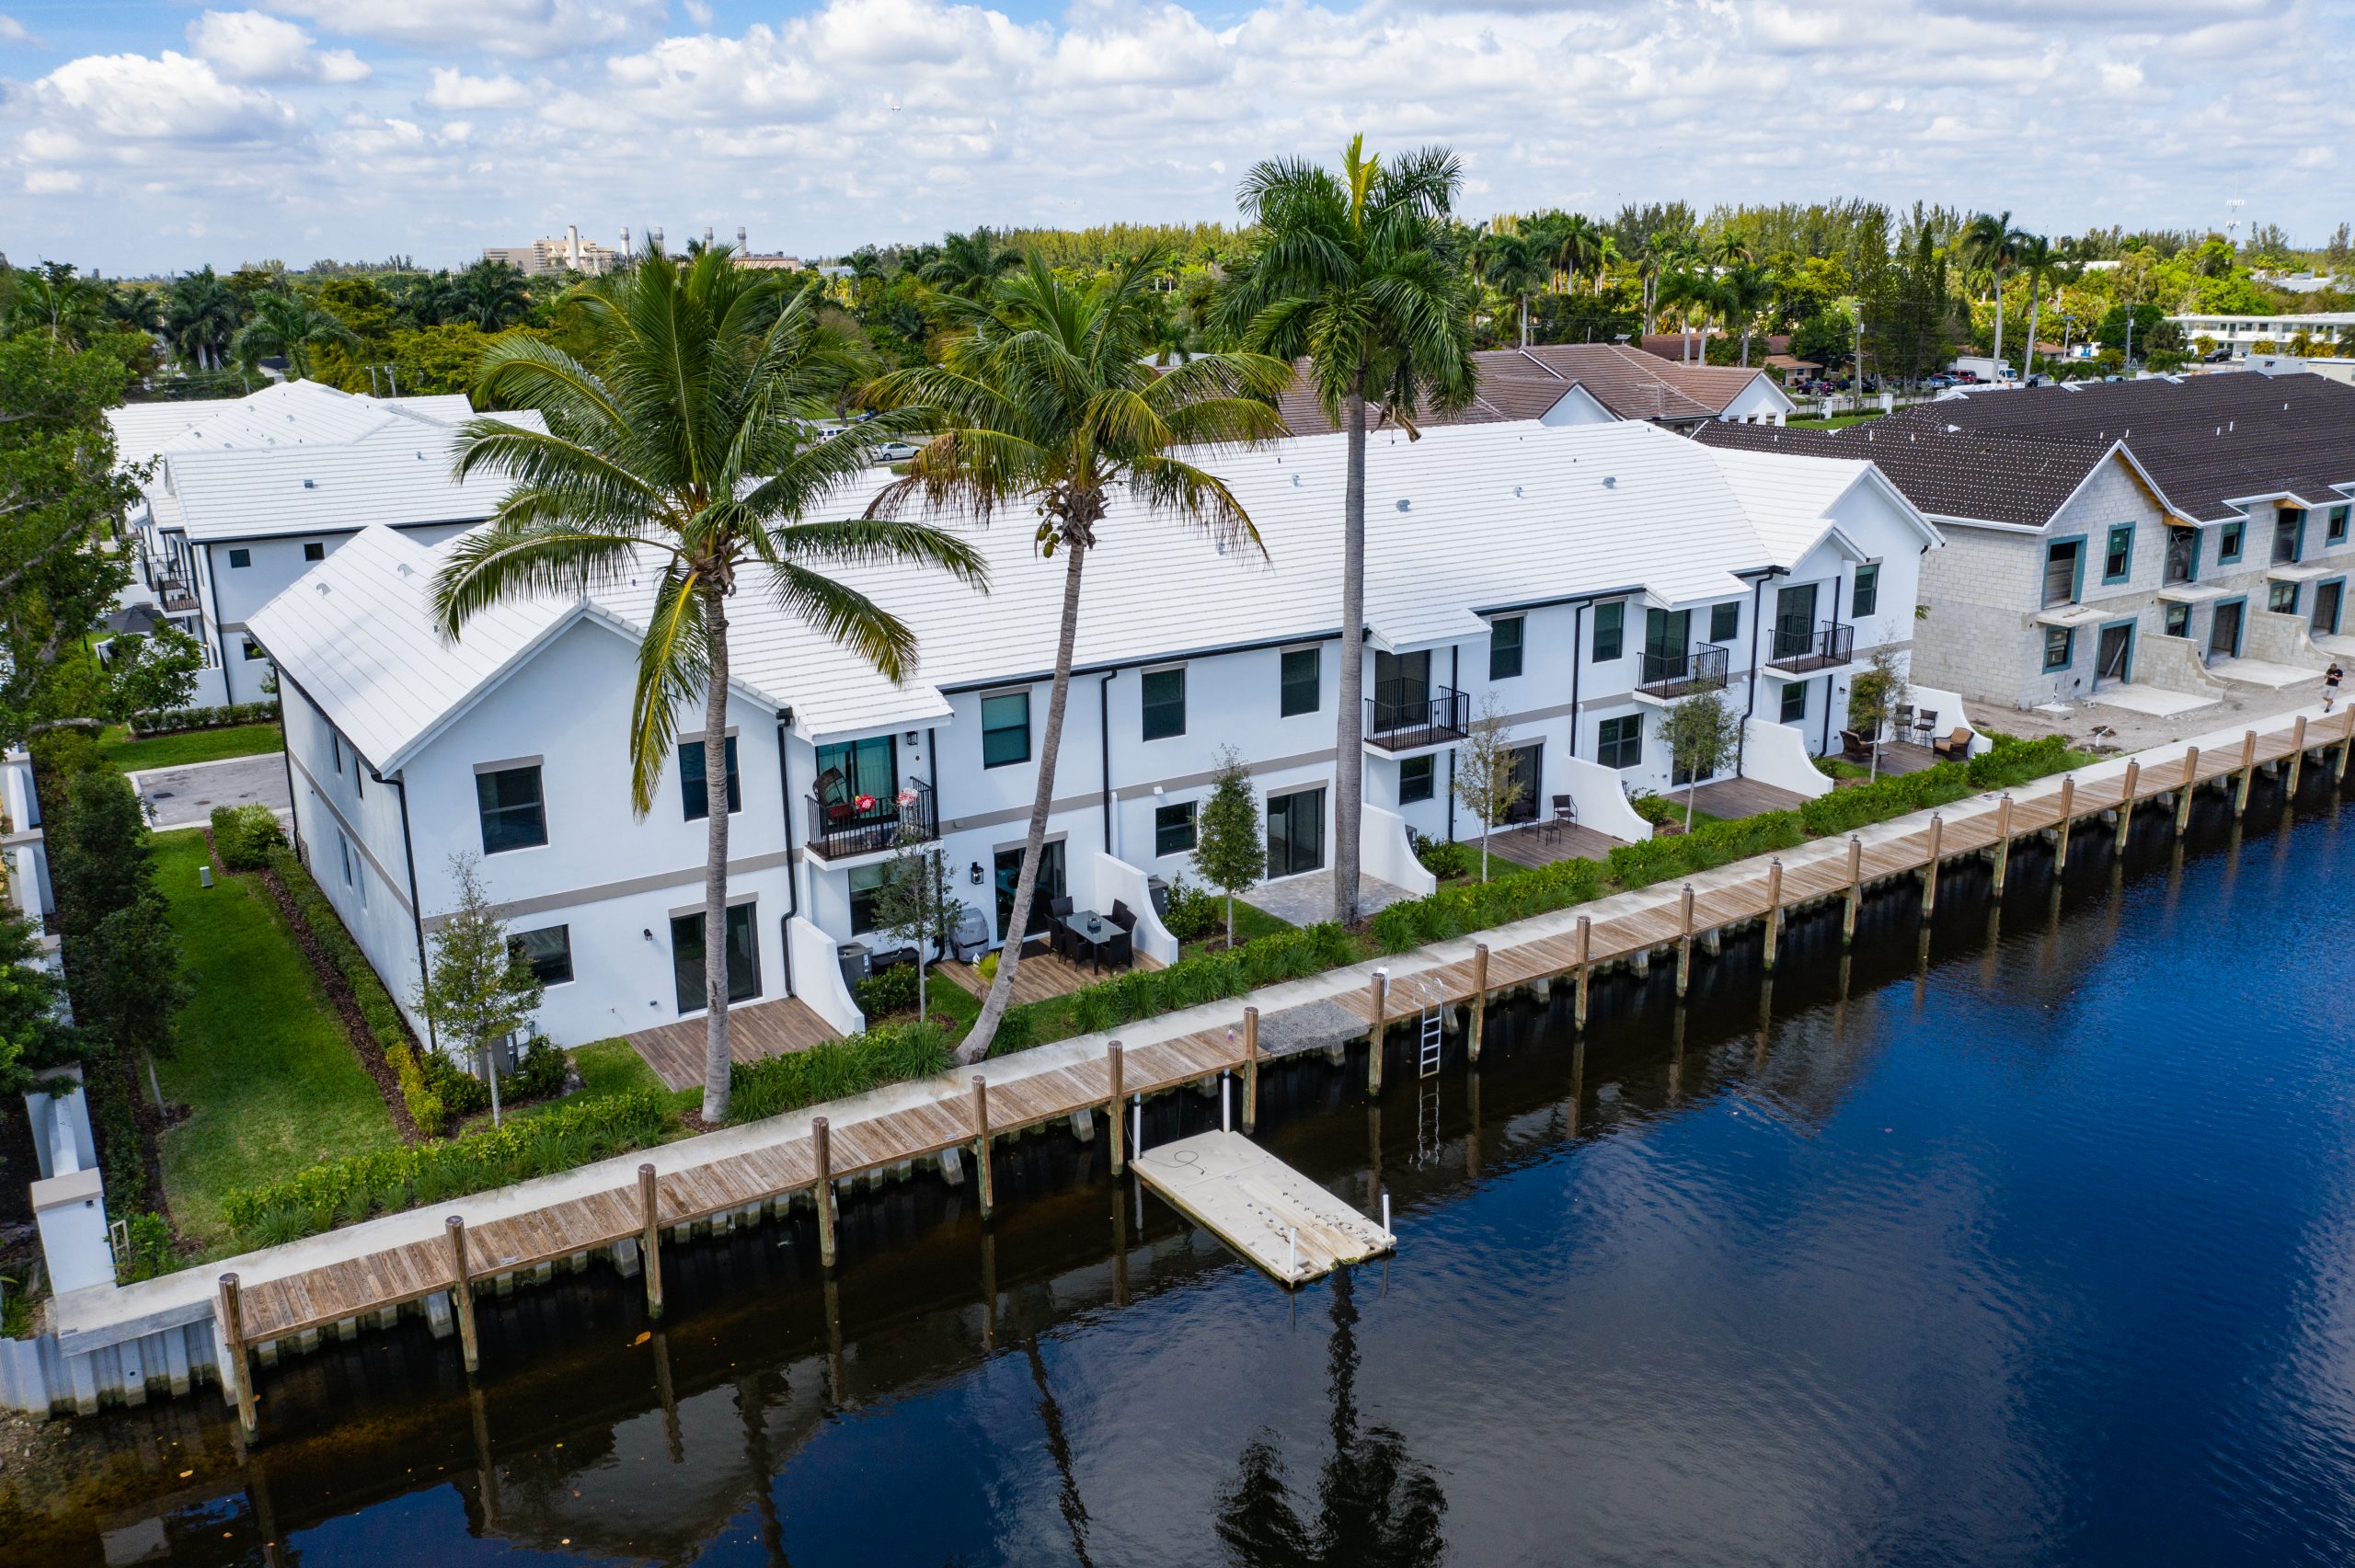 New townhomes available at Aqua Bella in Dania Beach, FL by Rocklyn Homes